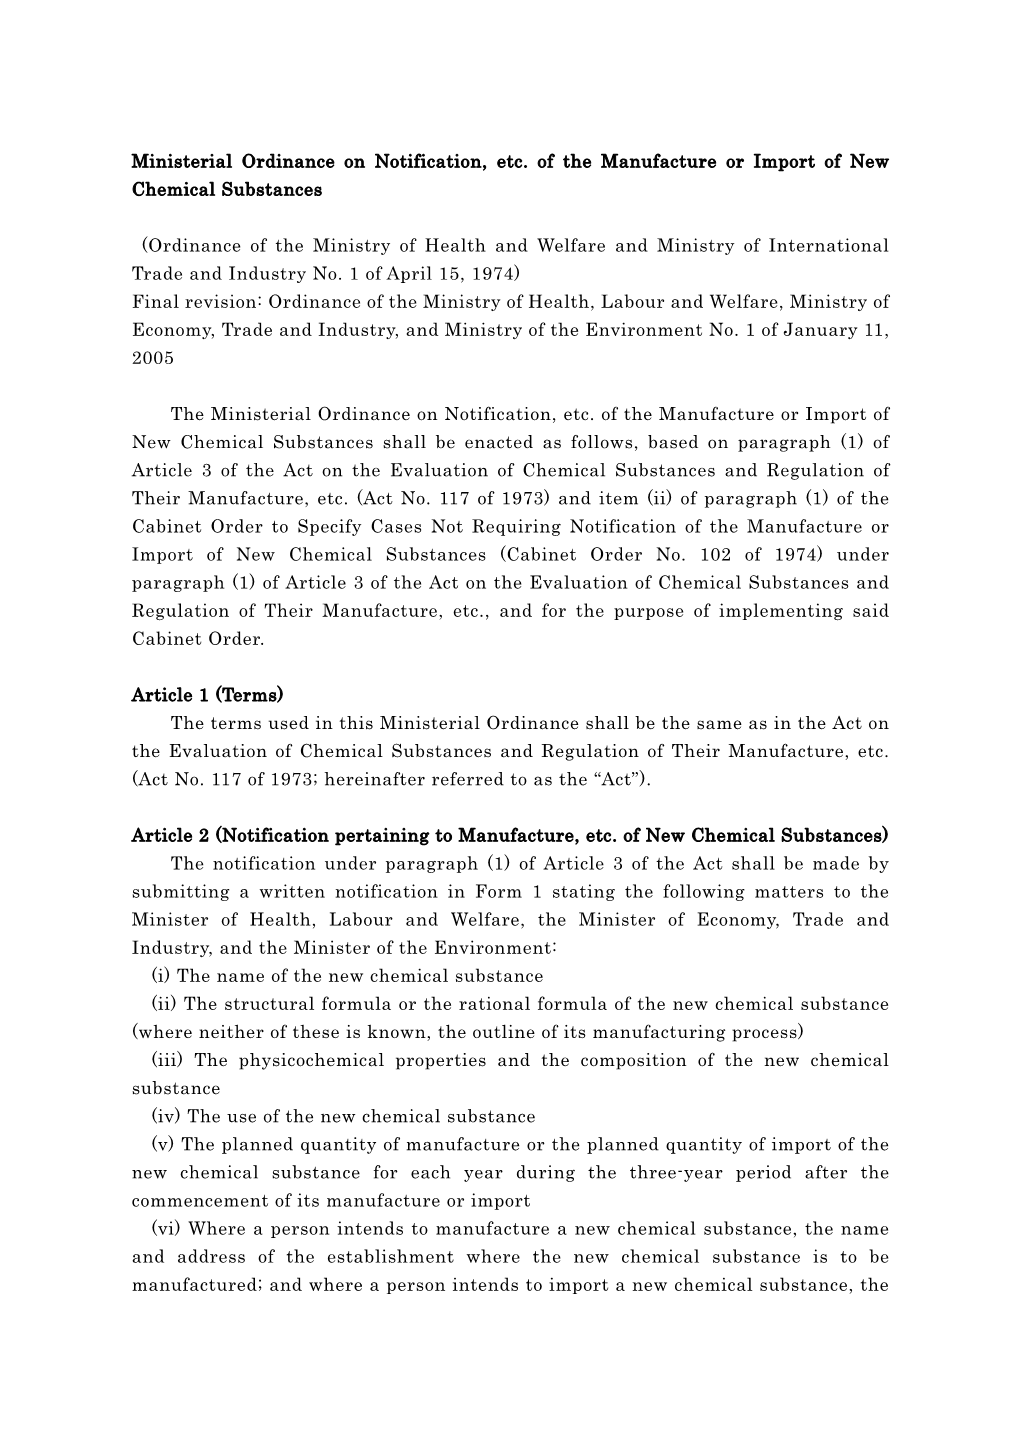 Ministerial Ordinance on Notification, Etc. of the Manufacture Or Import of New Chemical Substances